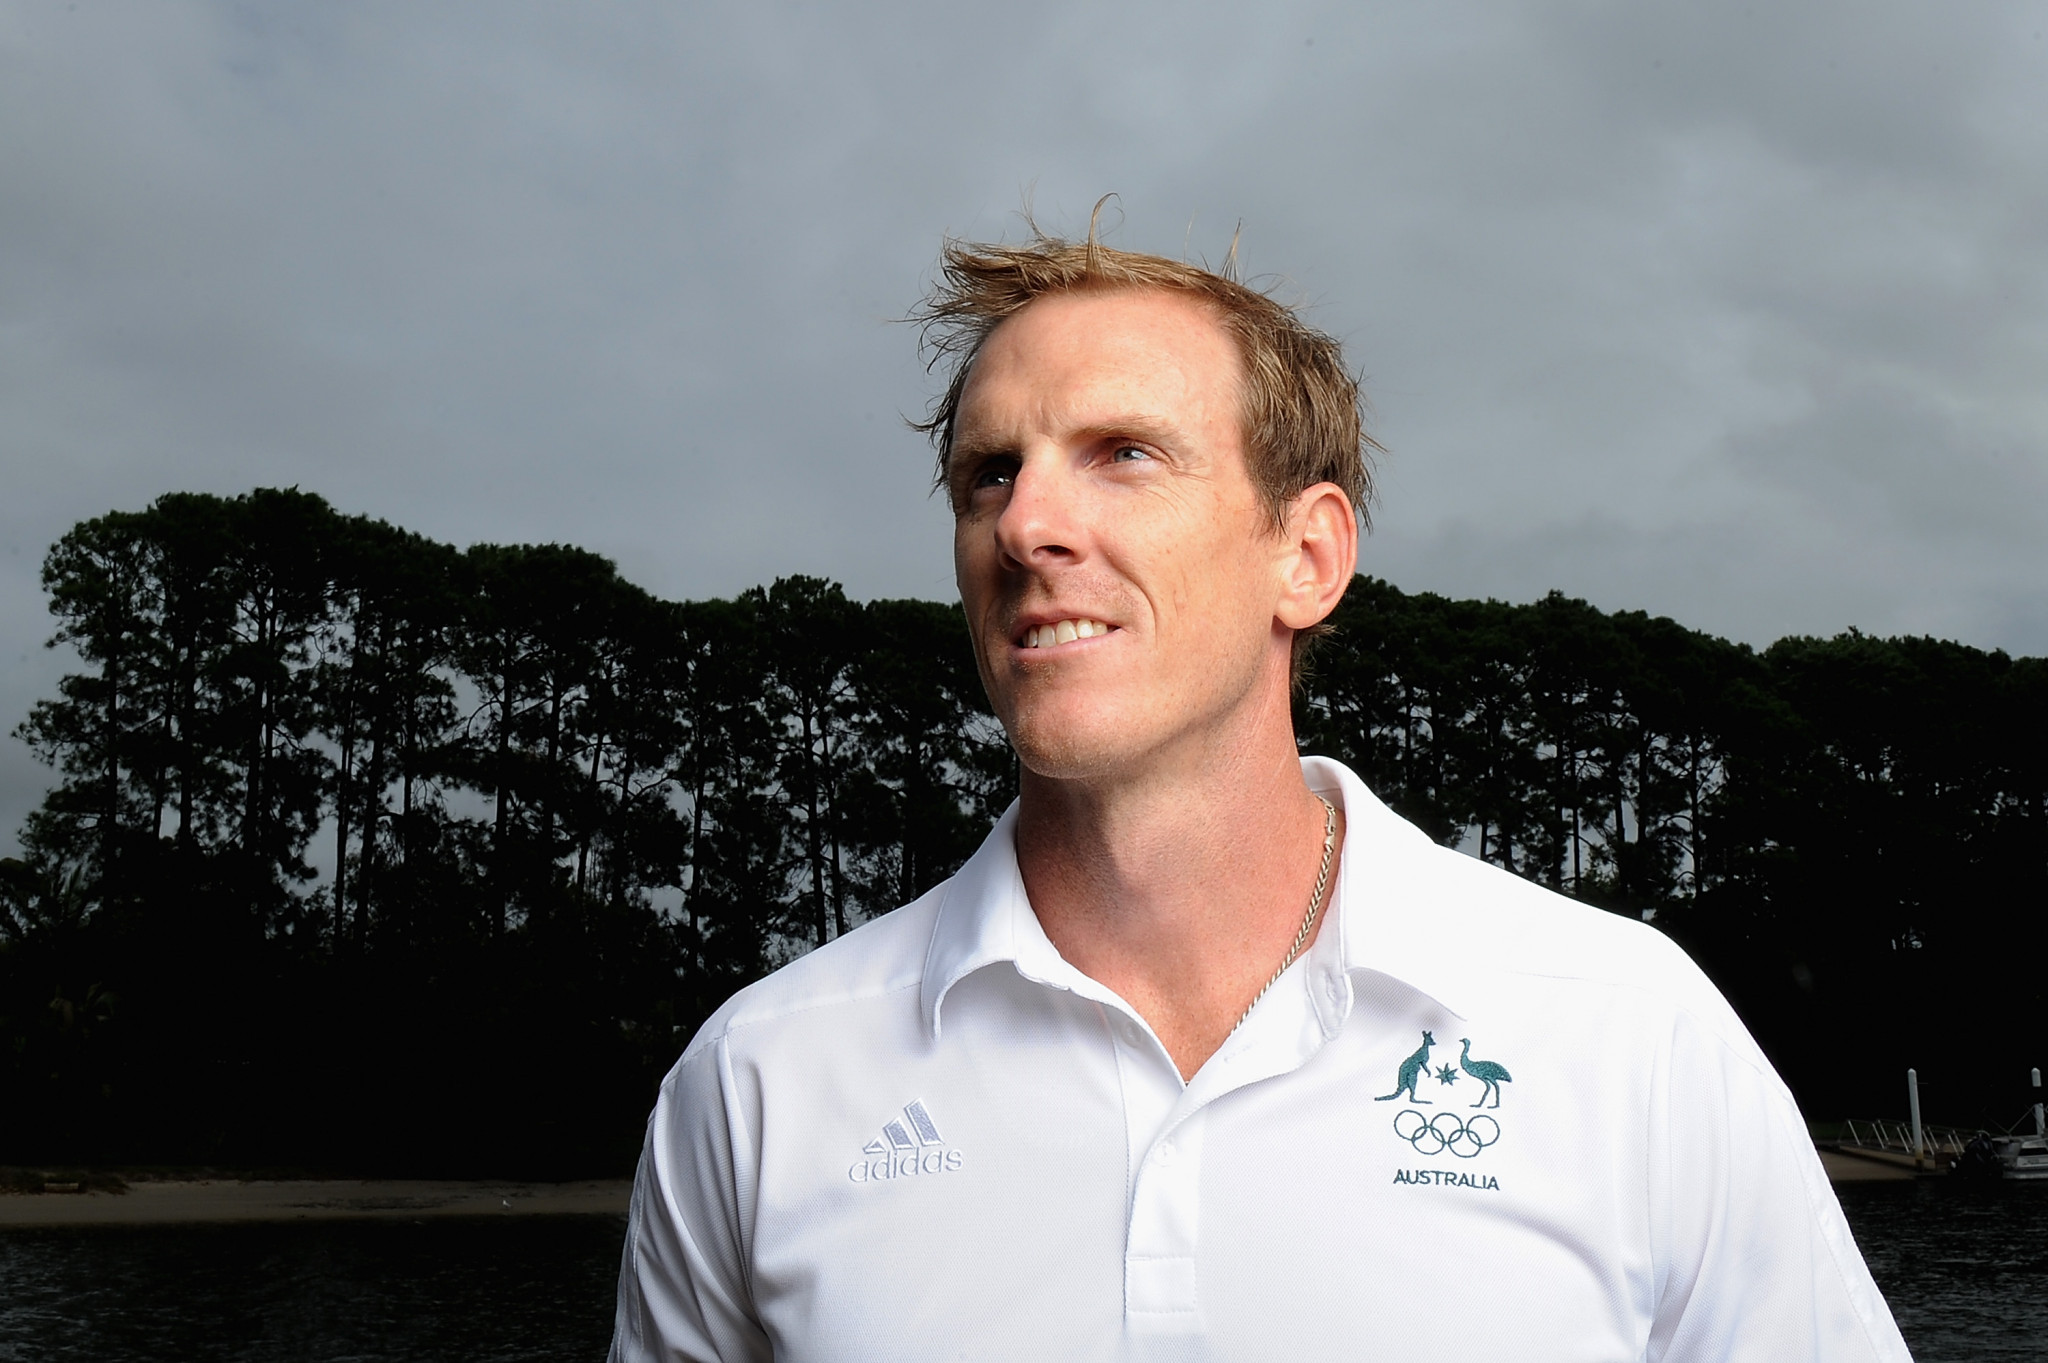 Olympic gold medallist appointed as Australian Chef de Mission for Samoa 2019